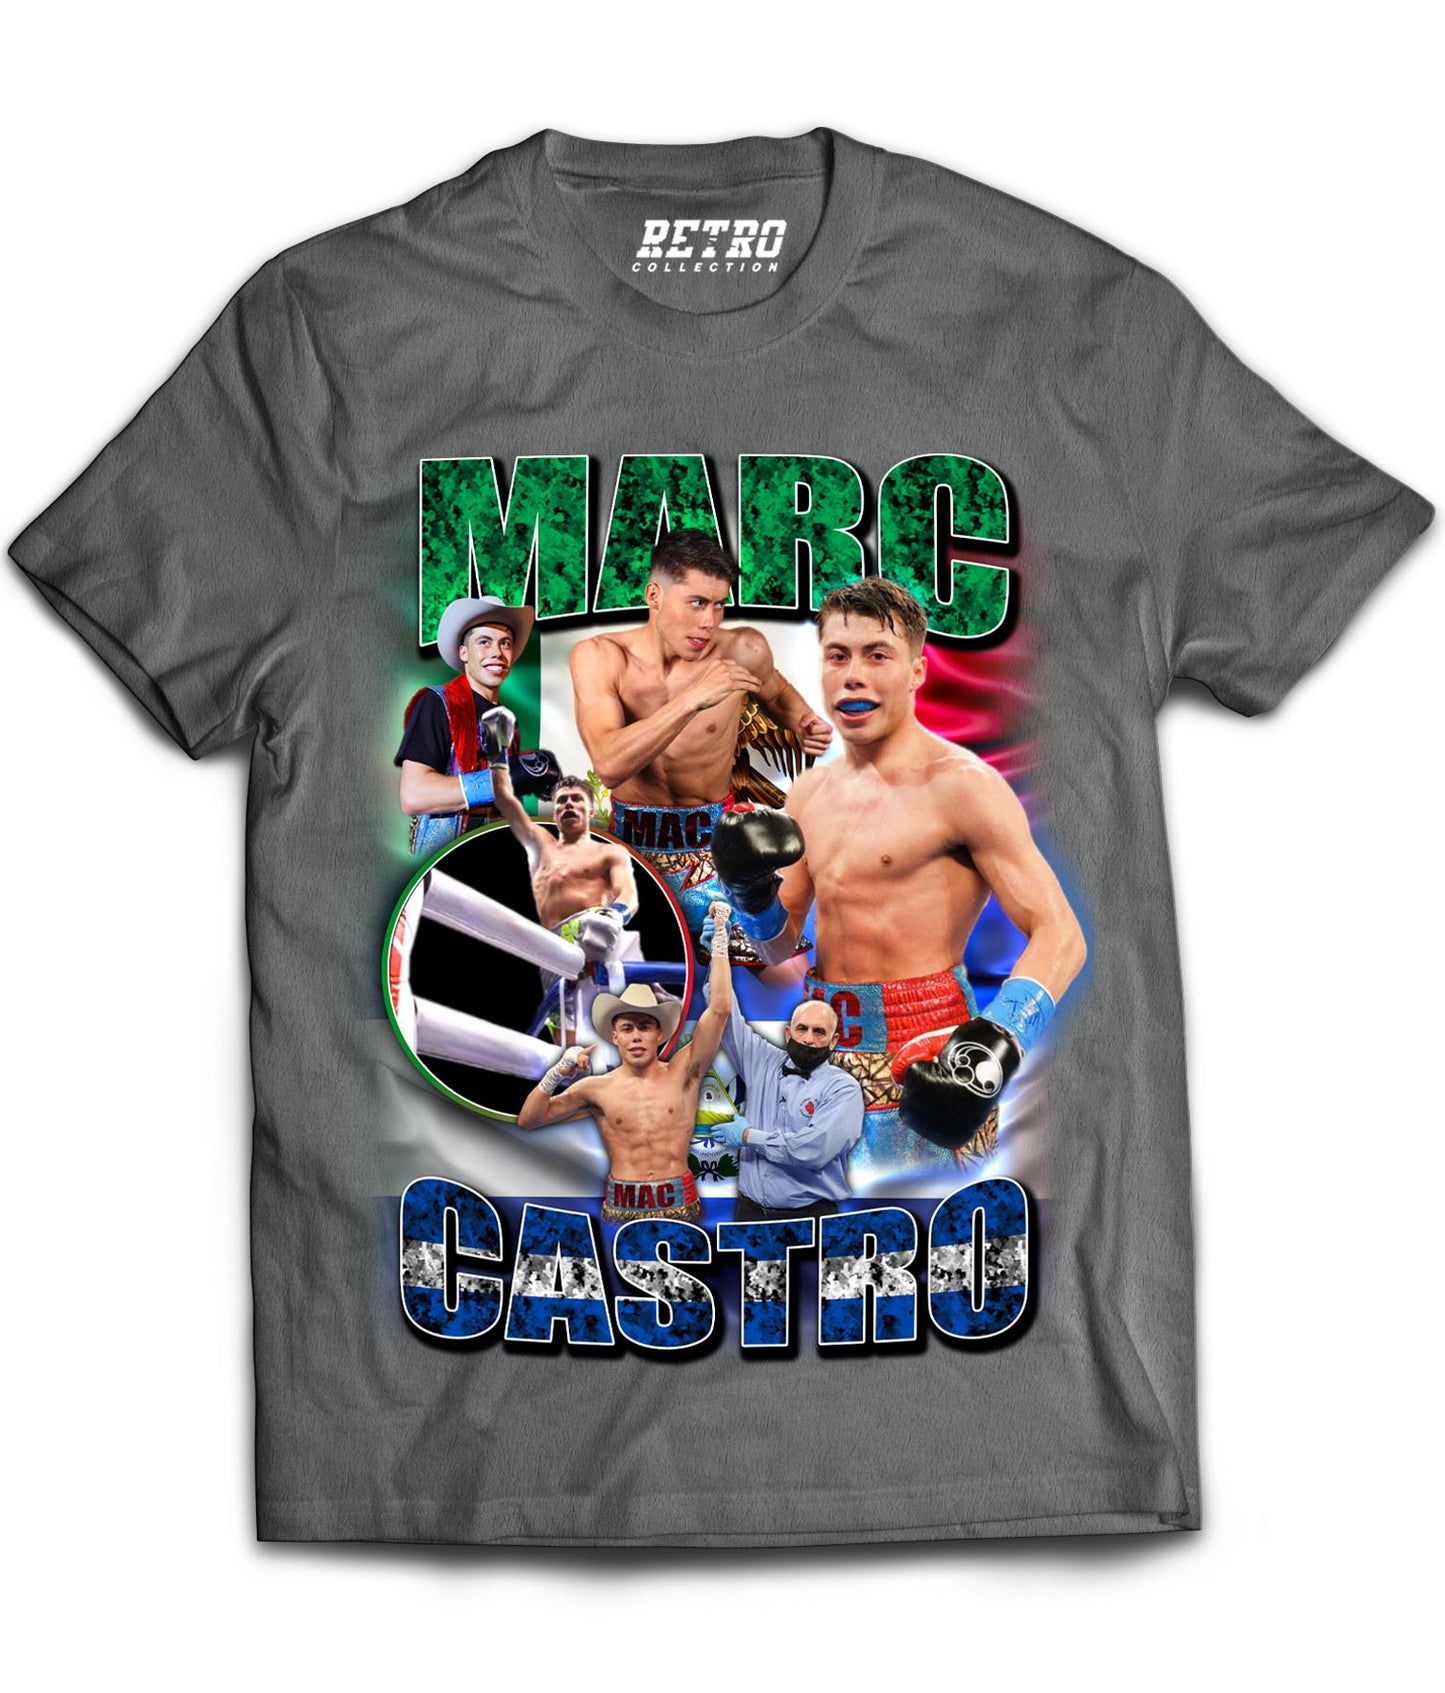 Marc Castro Tribute Shirt *LIMITED EDITION* (Black, Gray, Red, White)